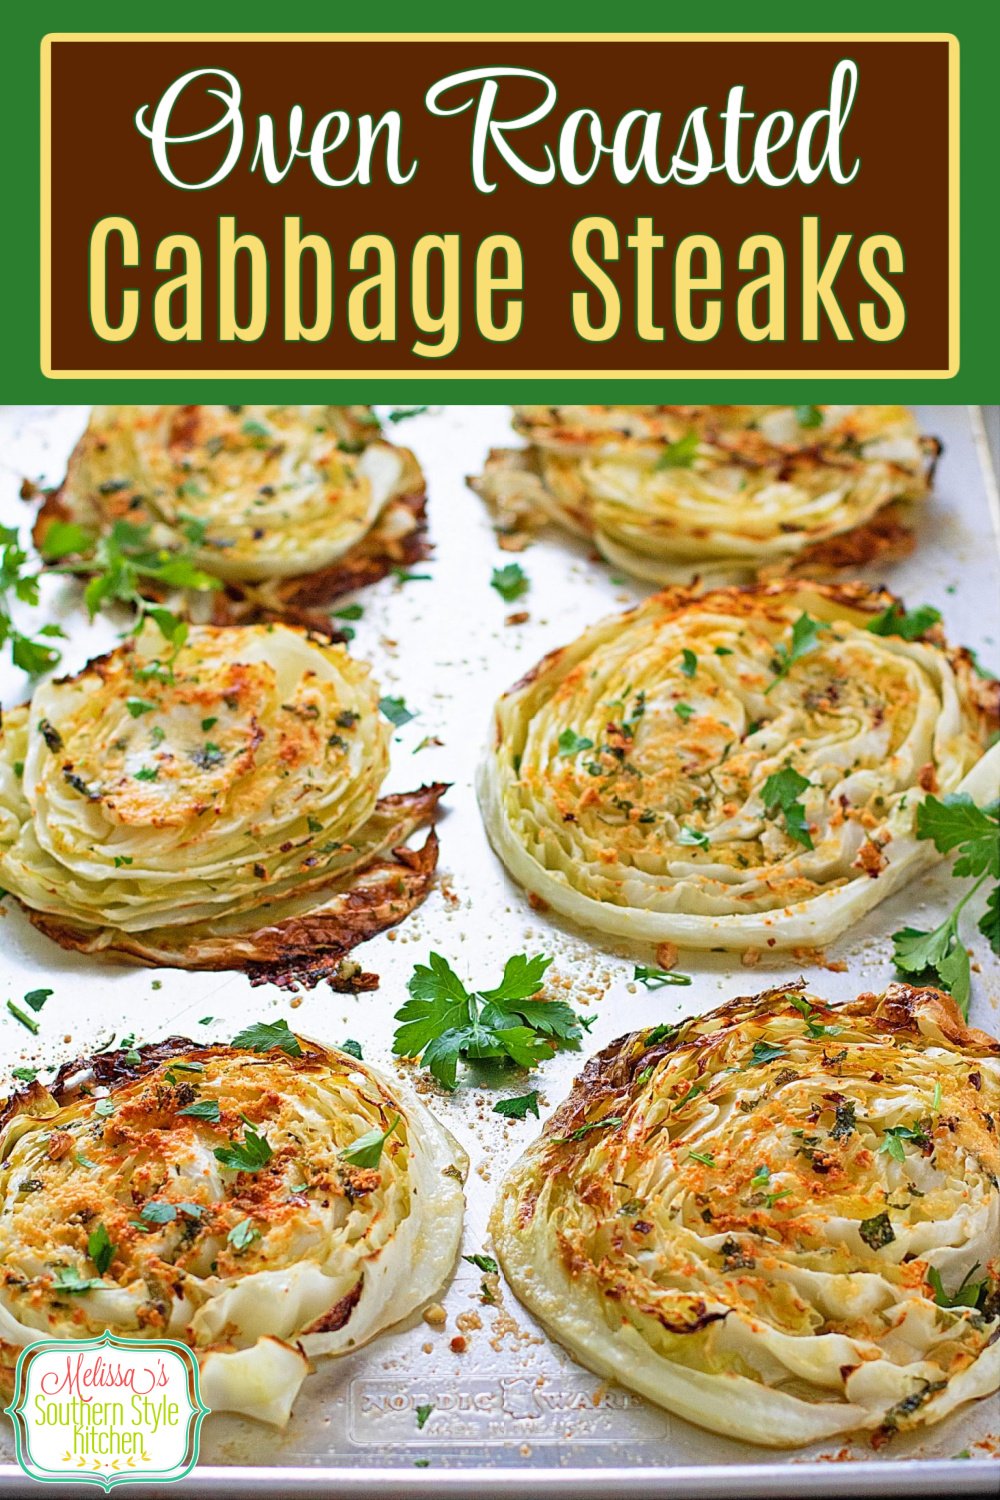 These Oven Roasted Cabbage Steaks make an inexpensive main dish or as a side dish alongside your favorite entrees #cabbagesteaks #roastedcabbage #lowcarbrecipes #cabbage #ovenroastedcabbage #roastedvegetables #sidedishrecipes #southernfood #southernrecipes via @melissasssk